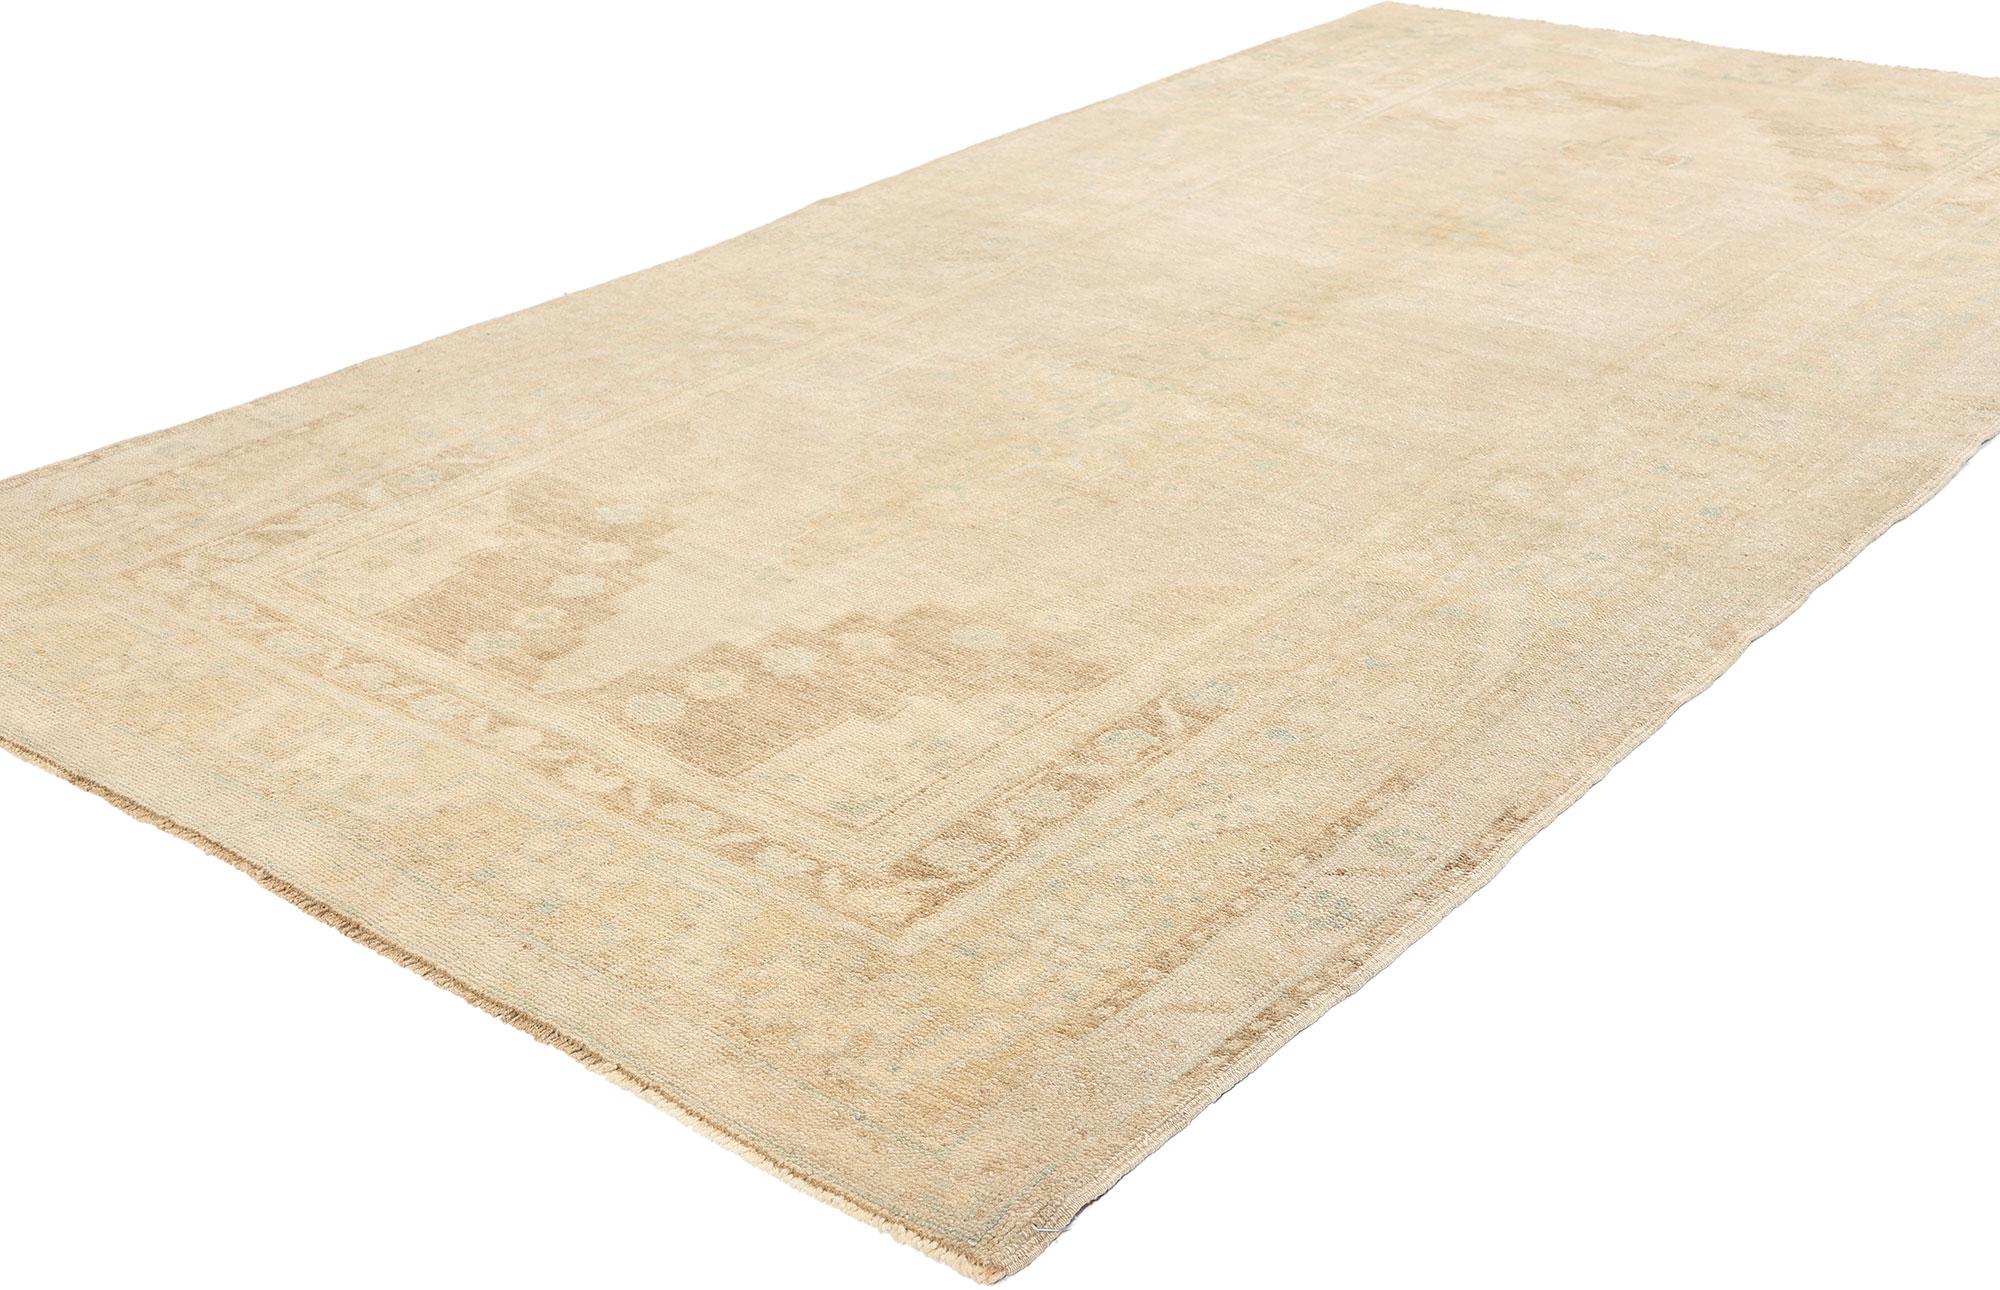 53688 Vintage Muted Turkish Oushak Rug, 04'04 x 08'06. Originating from Turkey's Oushak region, muted antique-washed Turkish Oushak rugs are renowned for their handwoven craftsmanship, boasting subtle patterns and a harmonious fusion of geometric